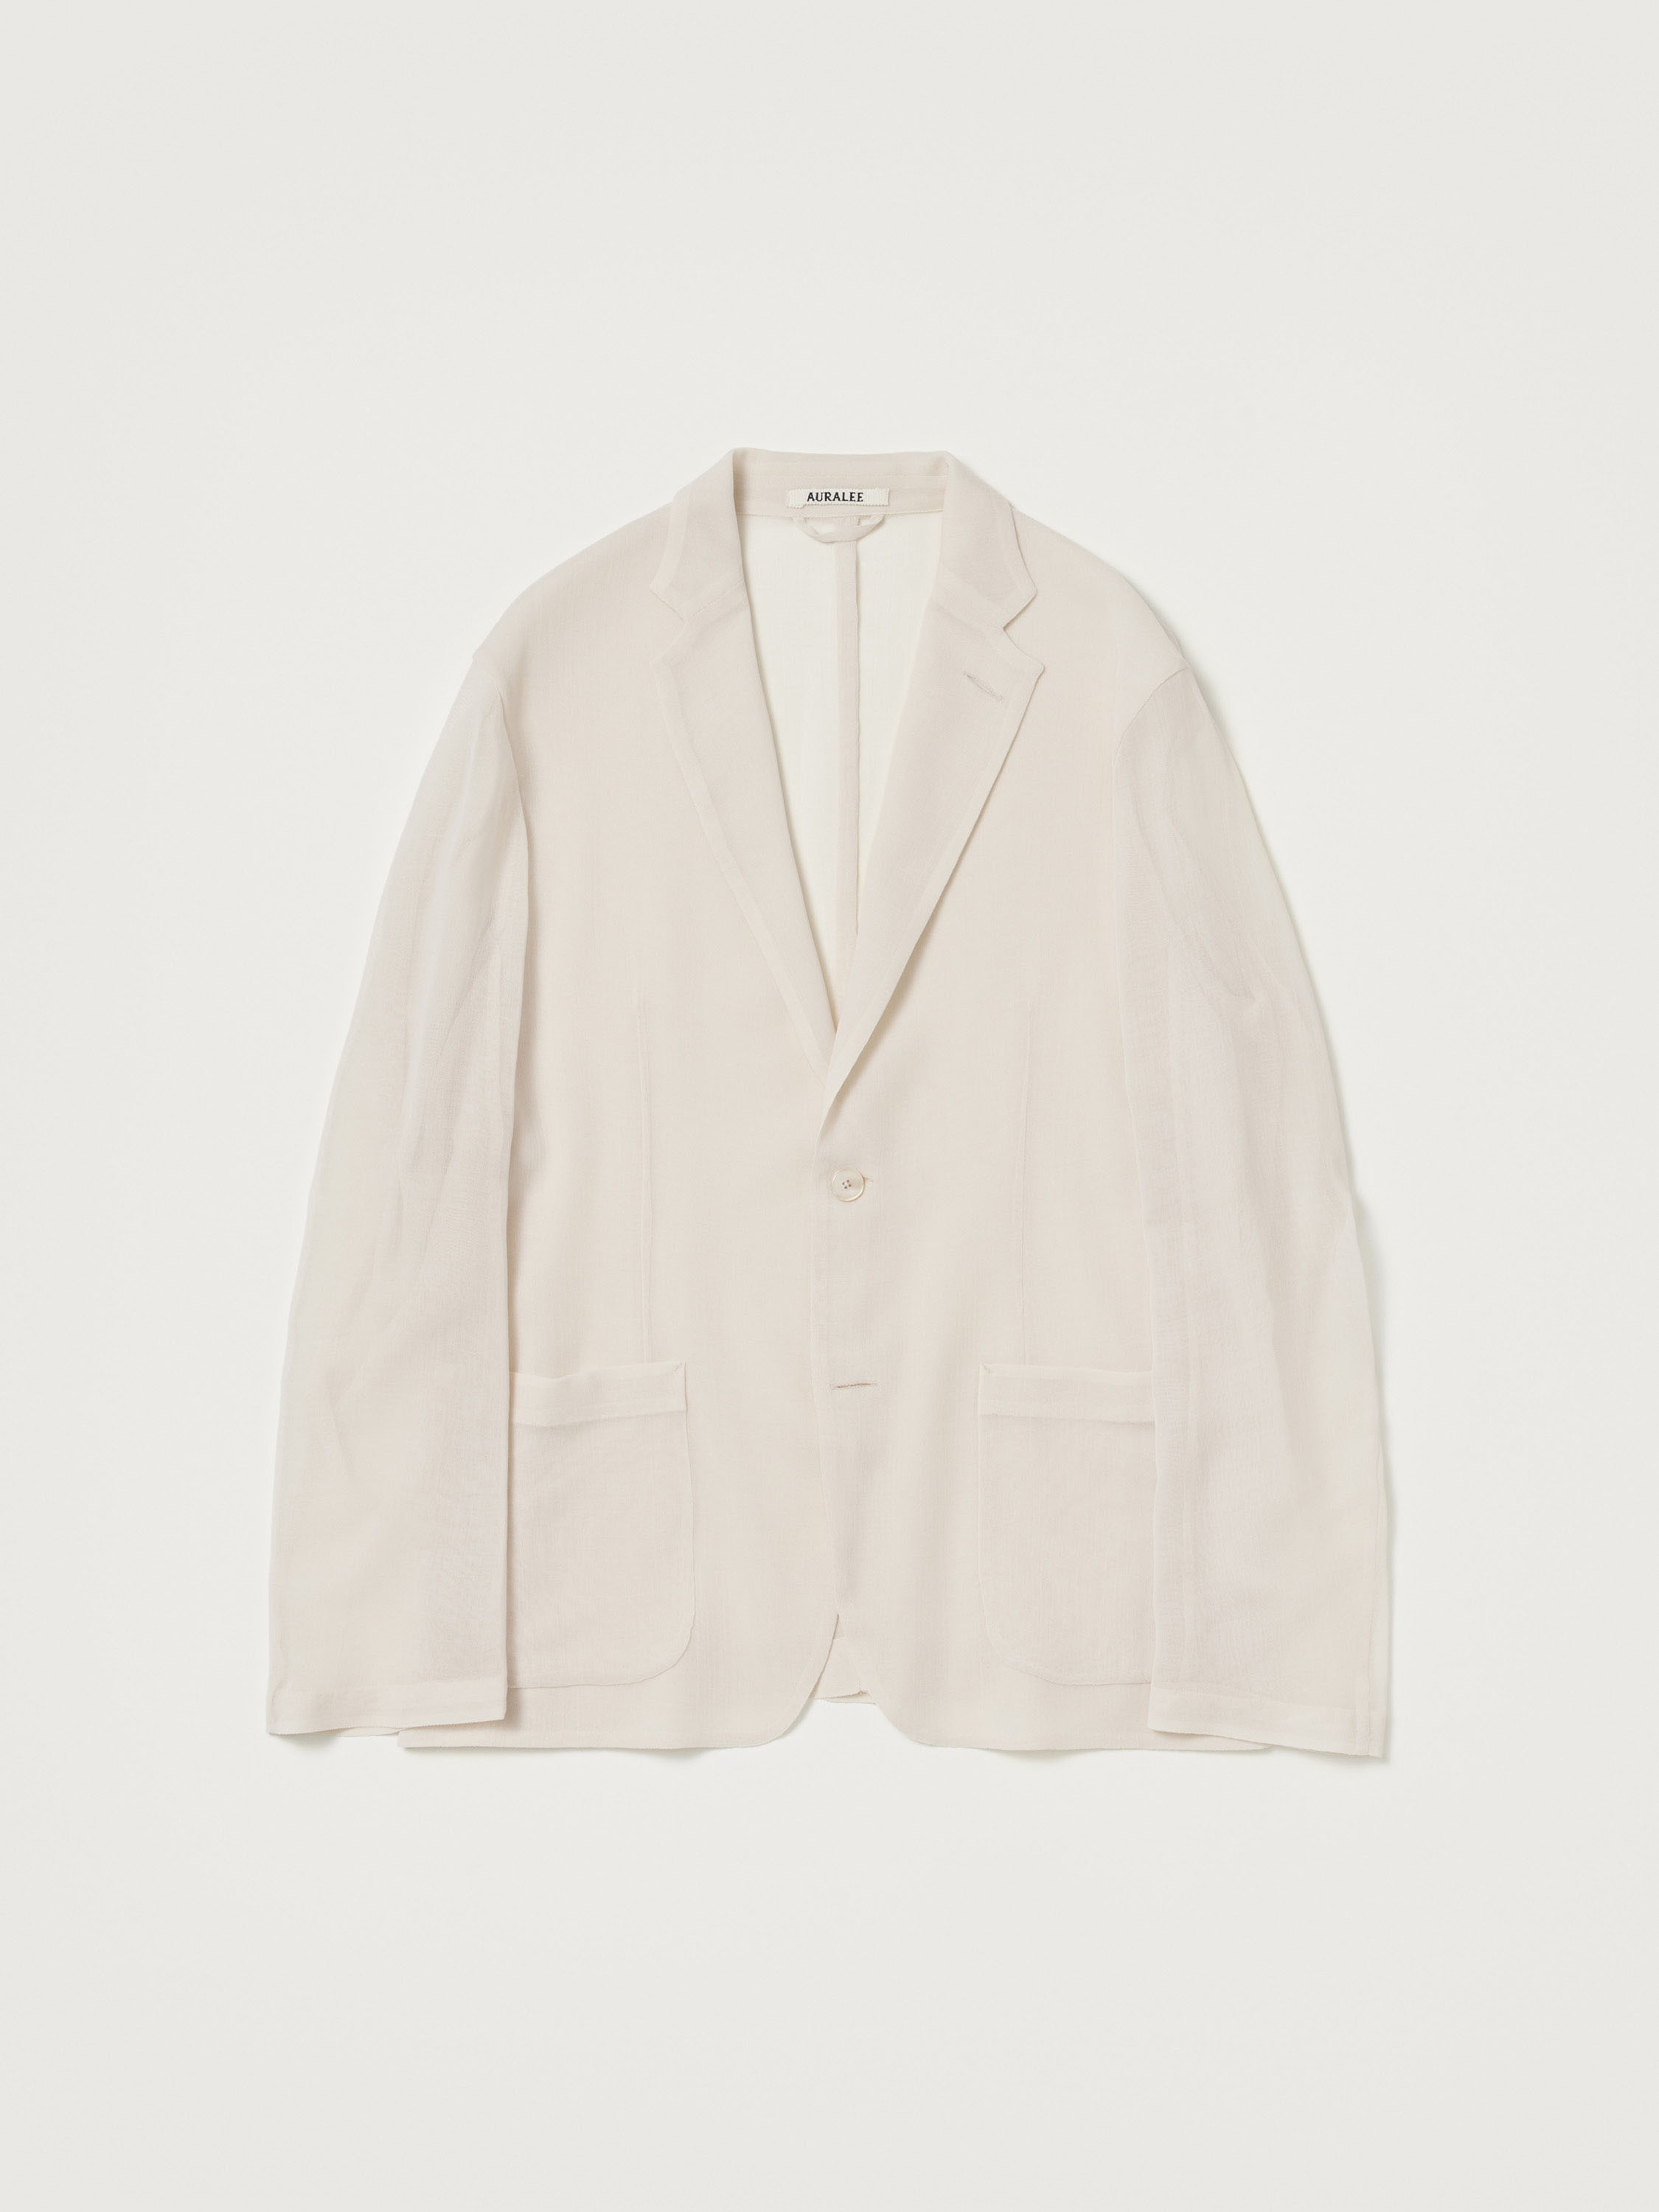 WOOL RECYCLE POLYESTER LENO SHEER JACKET 詳細画像 IVORY 1